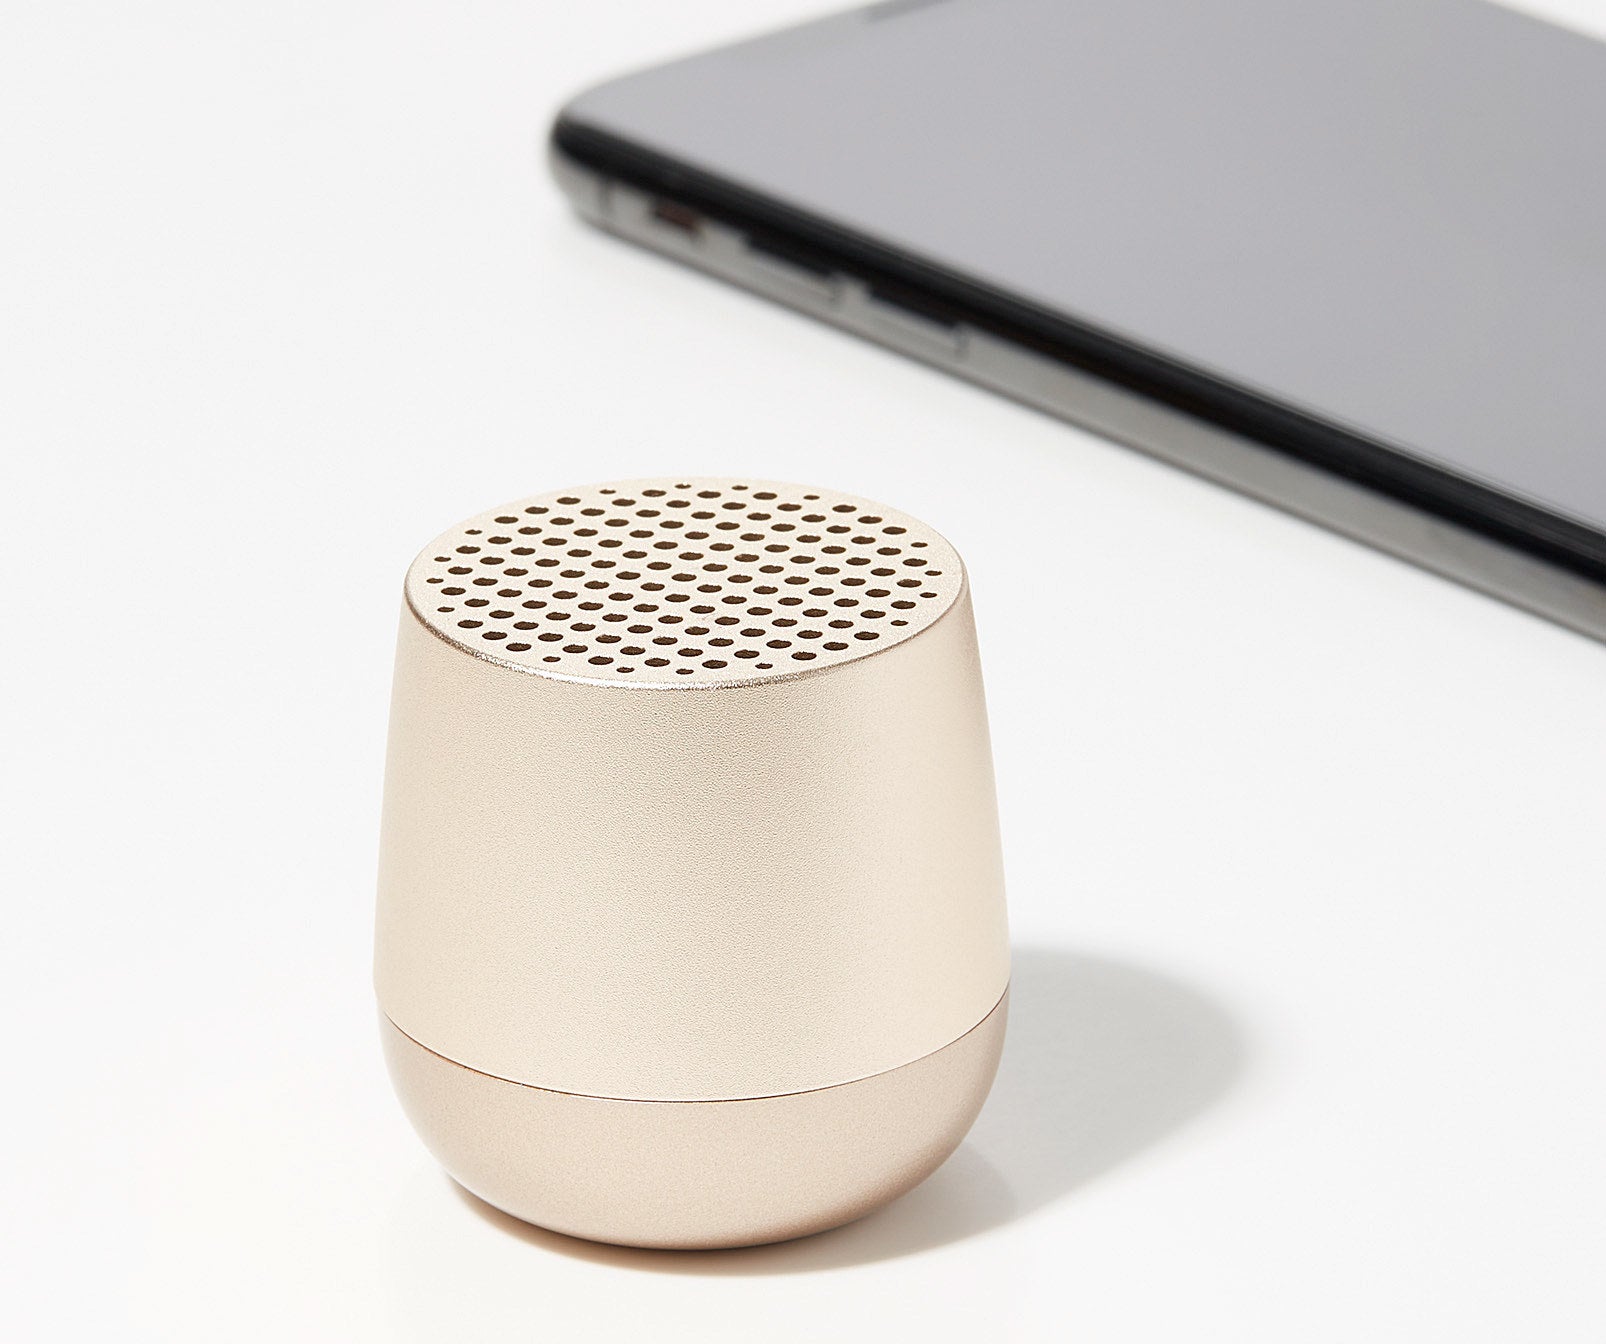 A small Bluetooth speaker on a plain background